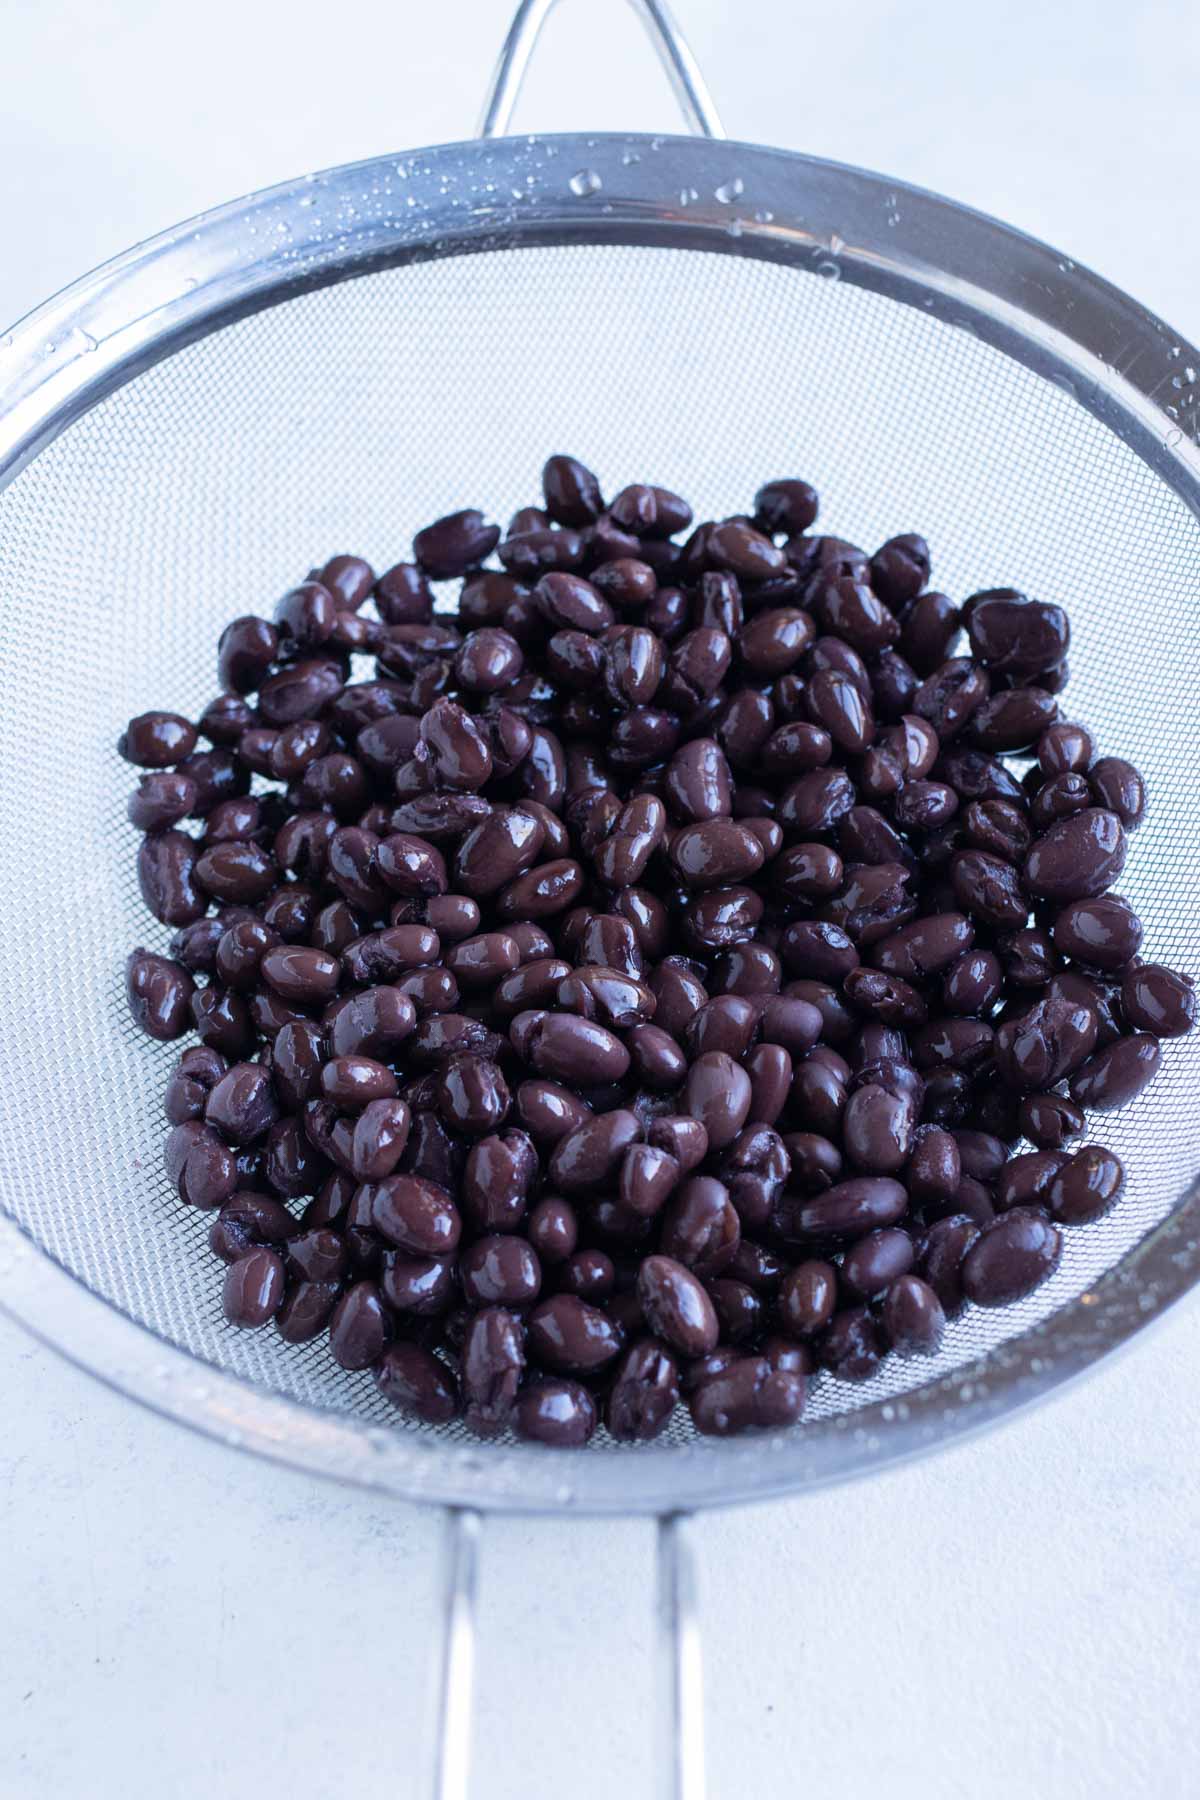 Black beans are rinsed in a colander.